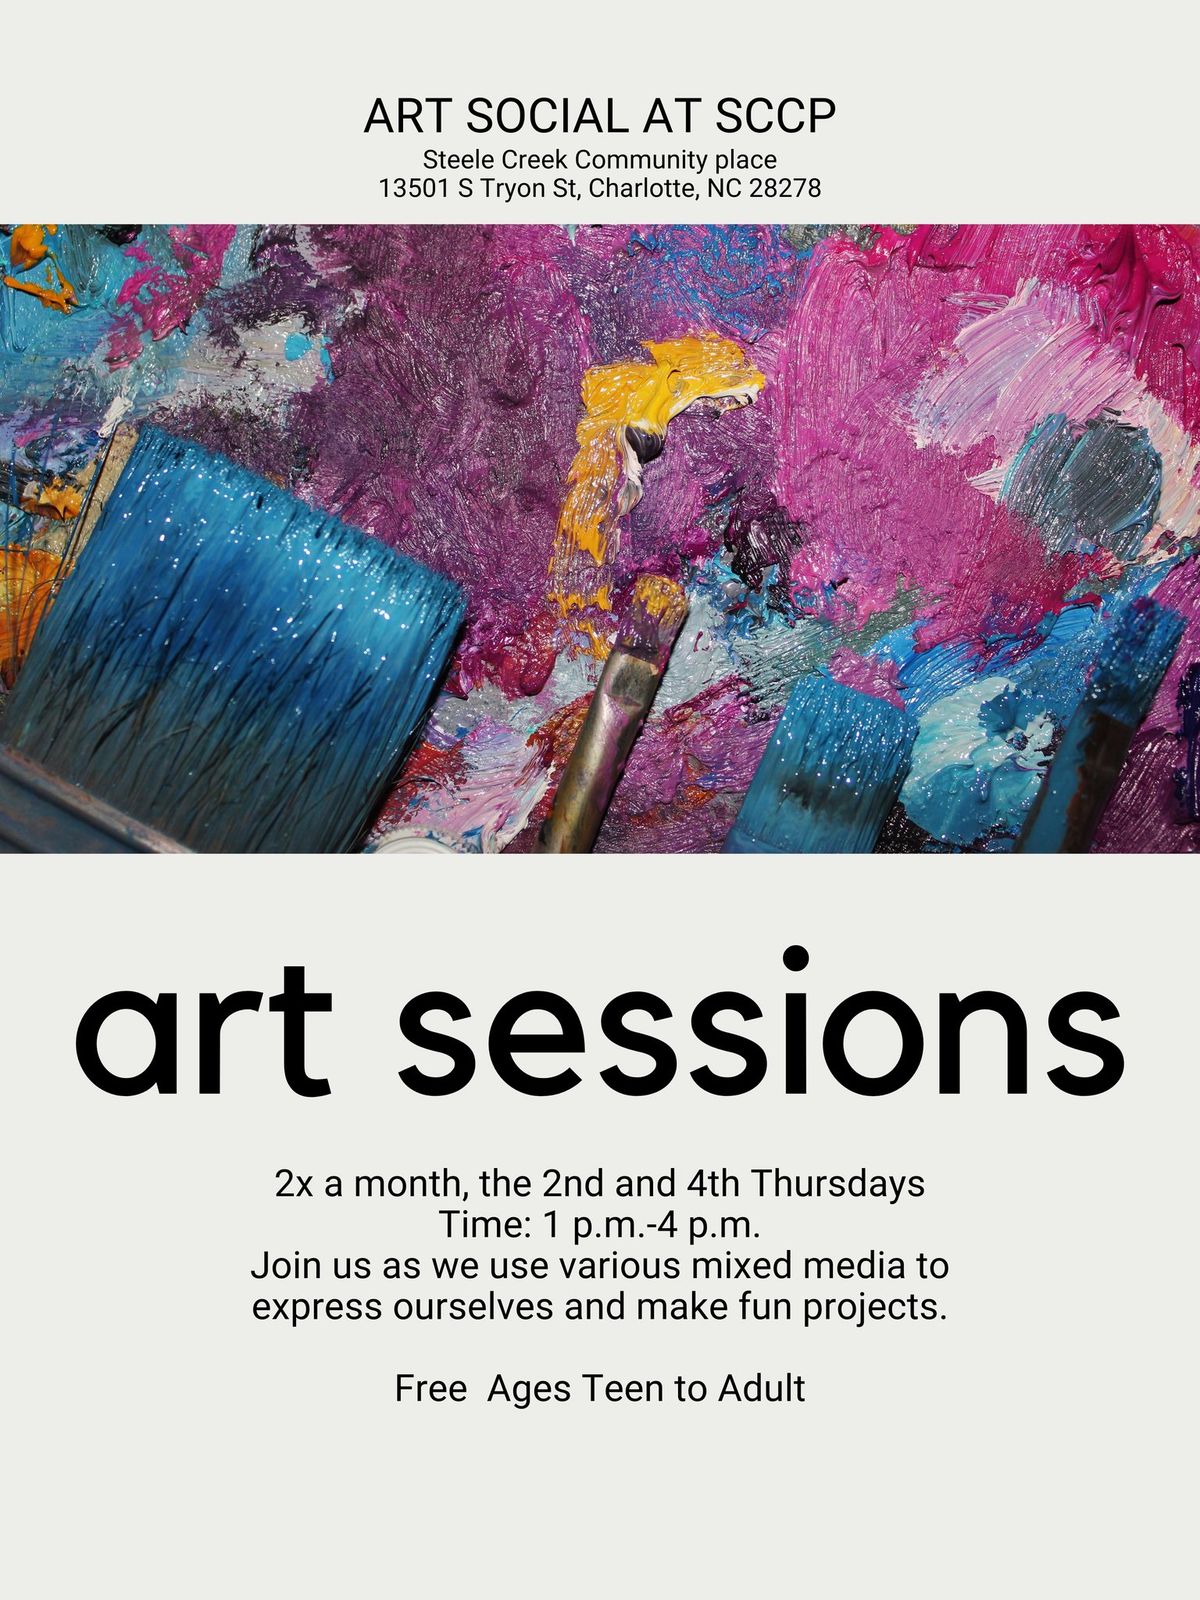 Art session at Steele Creek Community Place